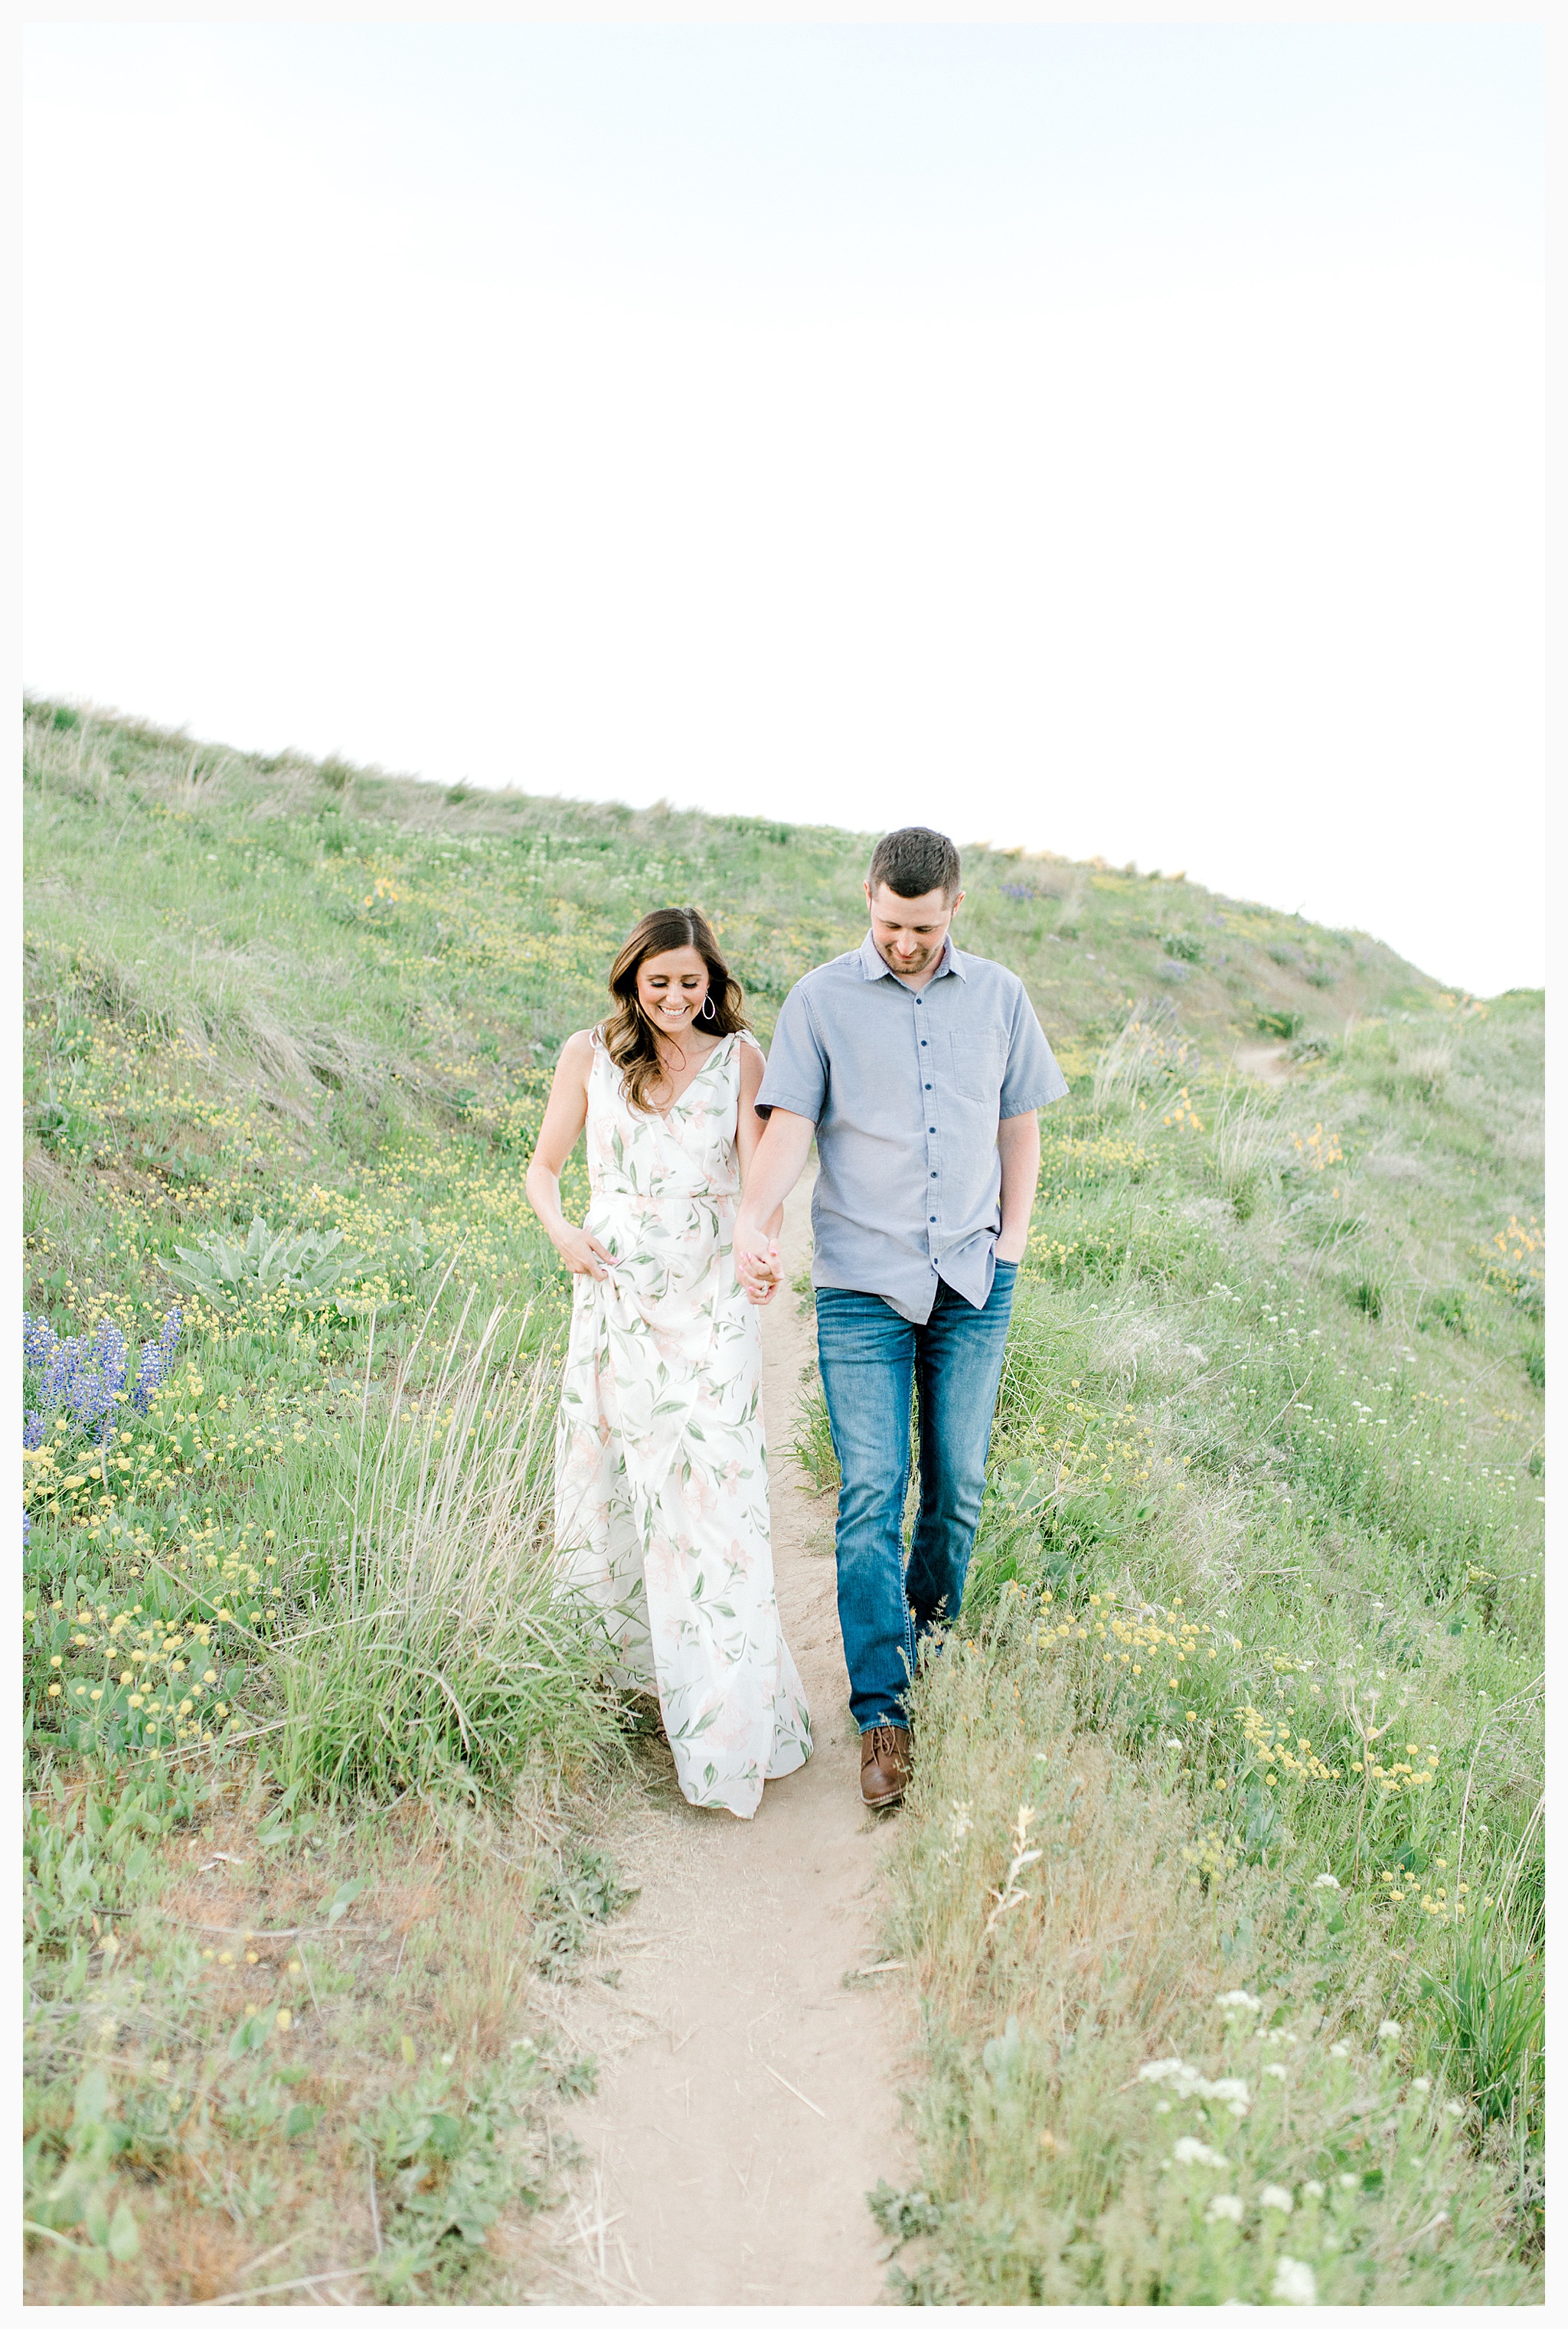 Engagement session amongst the wildflowers in Wenatchee, Washington | Engagement Session Outfit Inspiration for Wedding Photography with Emma Rose Company | Light and Airy PNW Photographer, Seattle Bride_0002.jpg